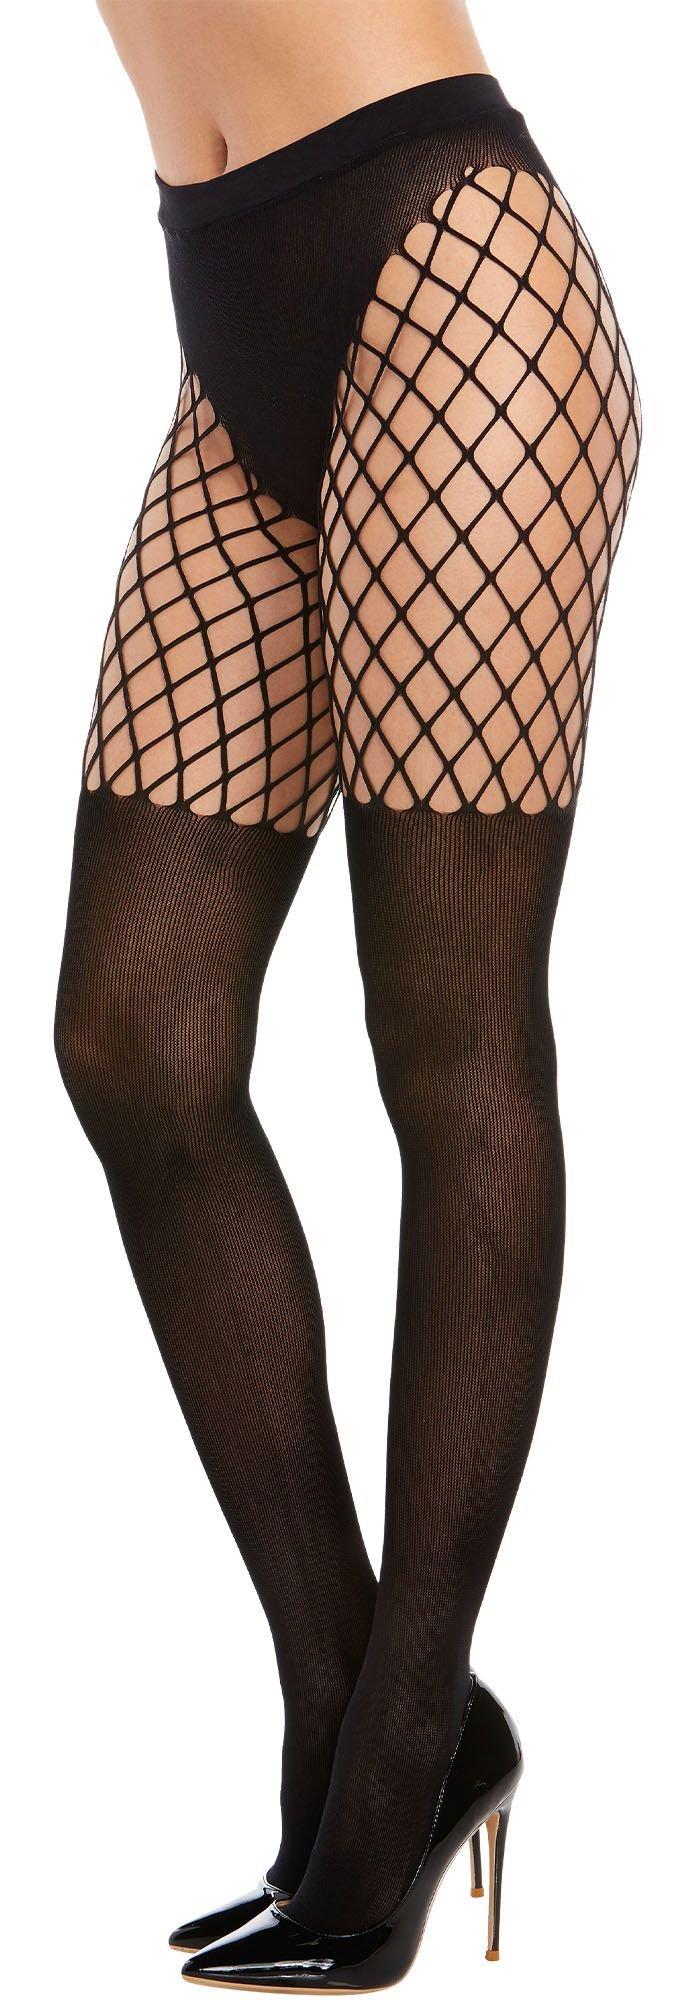 Layered tights, fishnet and black opaque, Black opaque tigh…